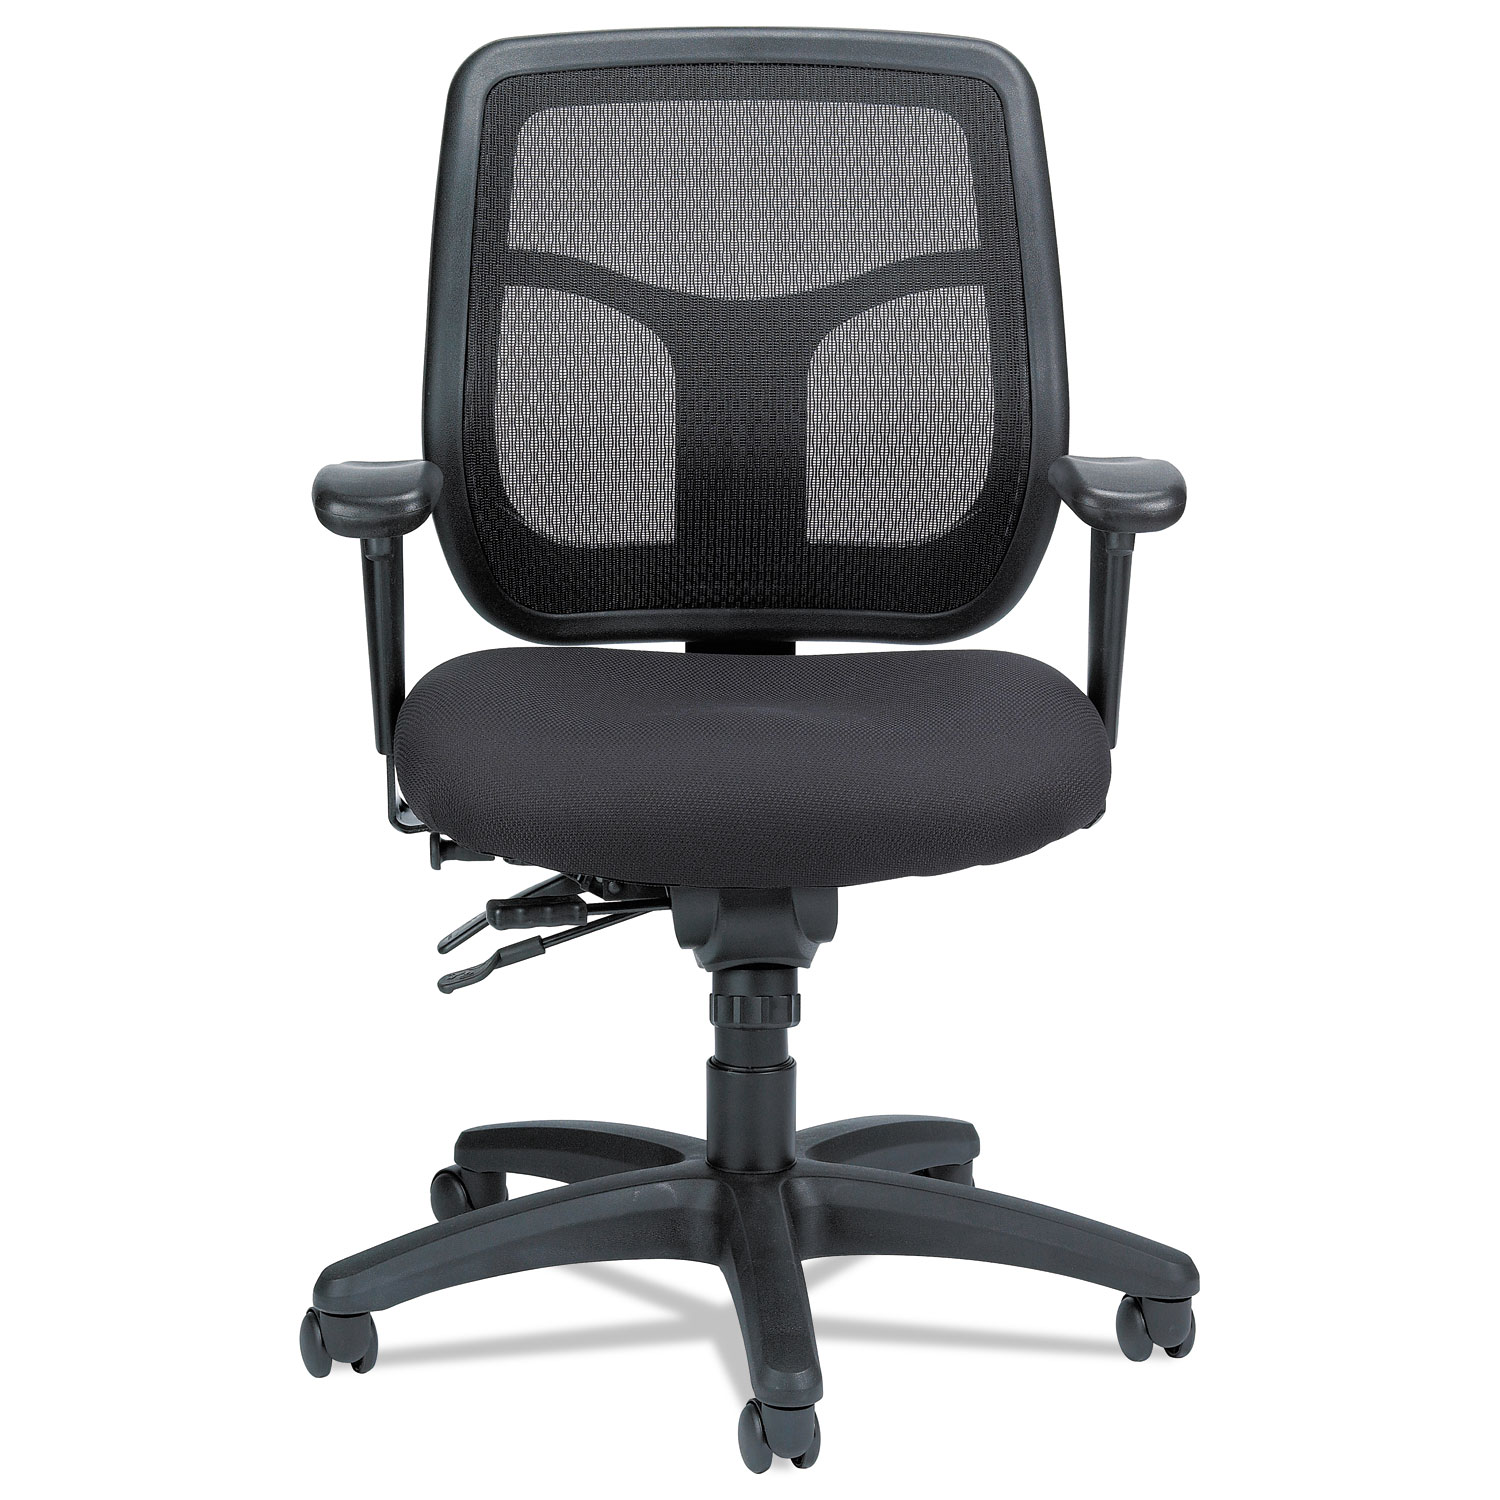  Eurotech MFT945SL Apollo Multi-Function Mesh Task Chair, Supports up to 250 lbs., Silver Seat/Silver Back, Black Base (EUTMFT945SL) 